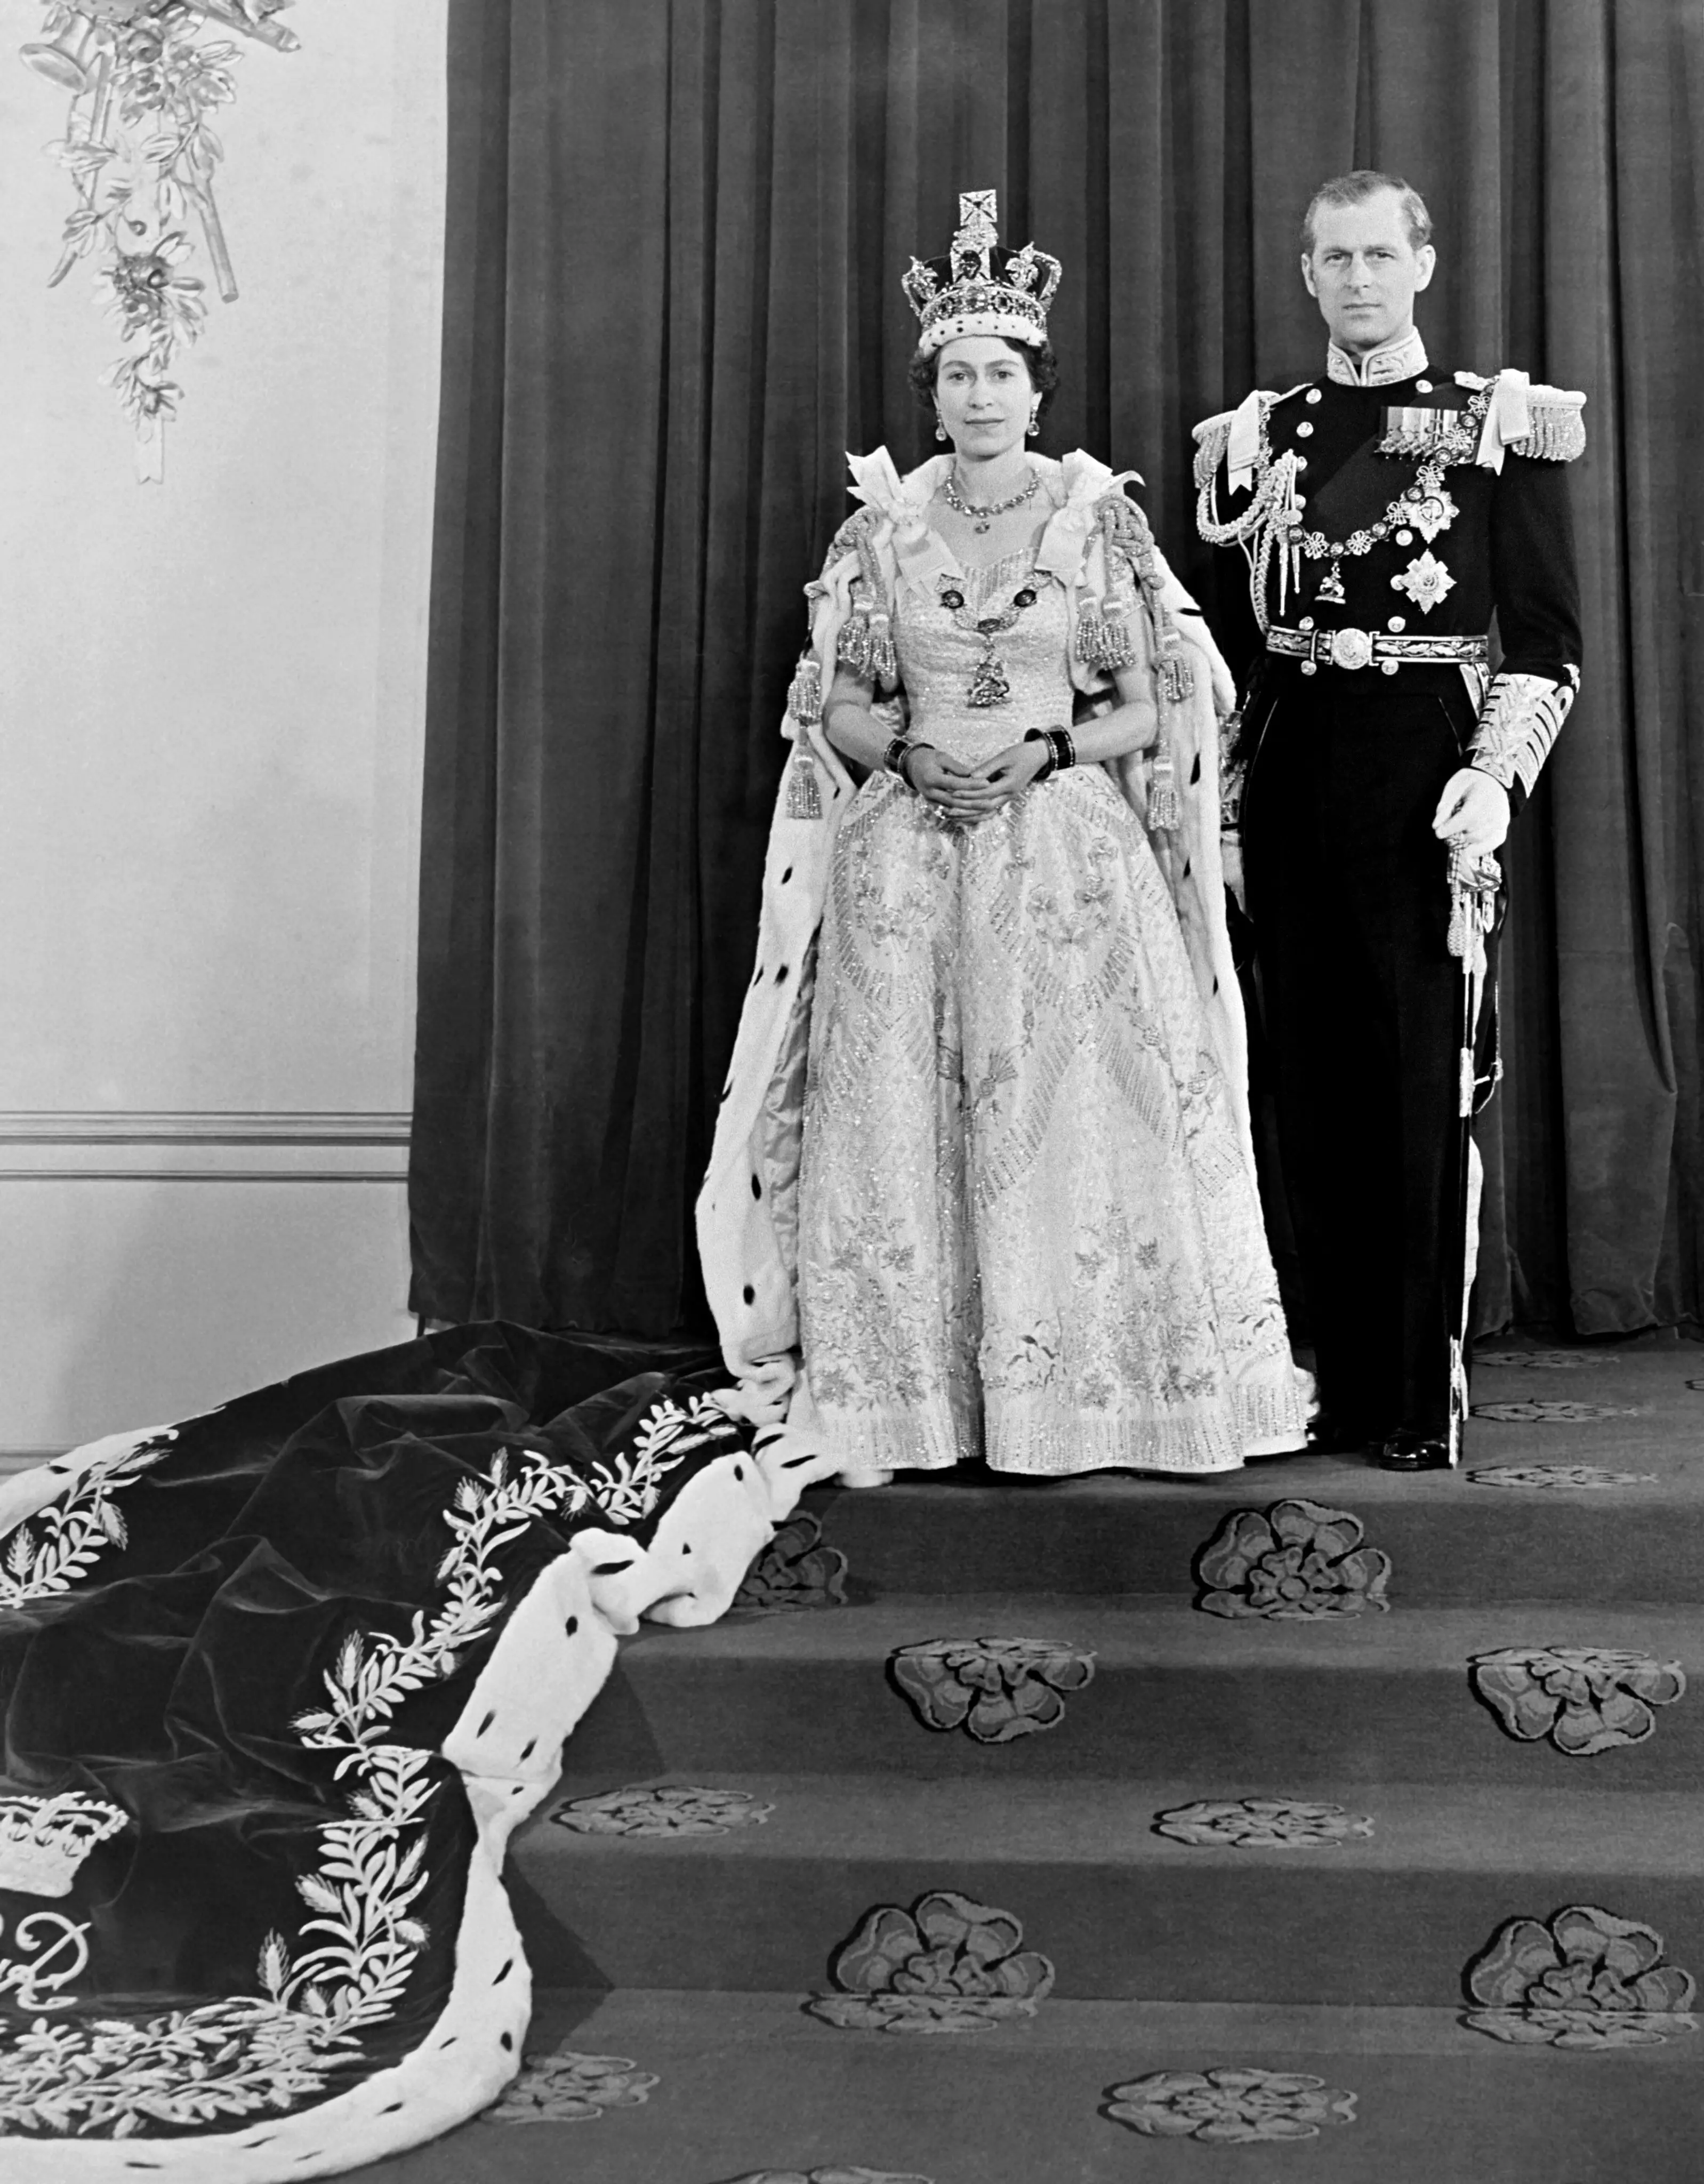 The Queen and Prince Philip at Buckingham Palace after her coronation in 1953 (